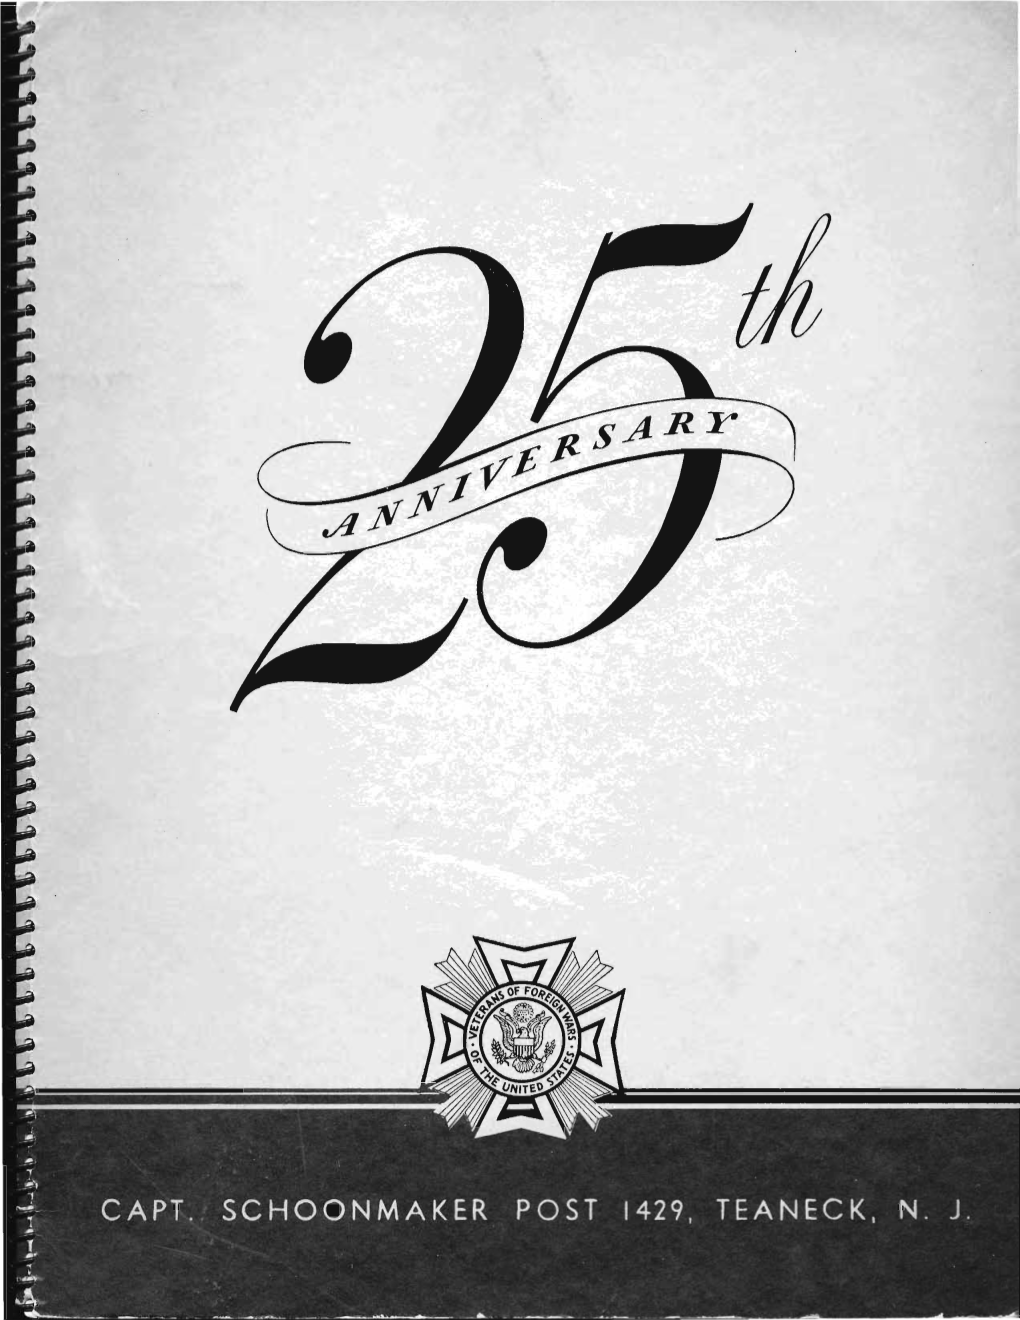 25Th Anniversary Year Book of Captain Stephen